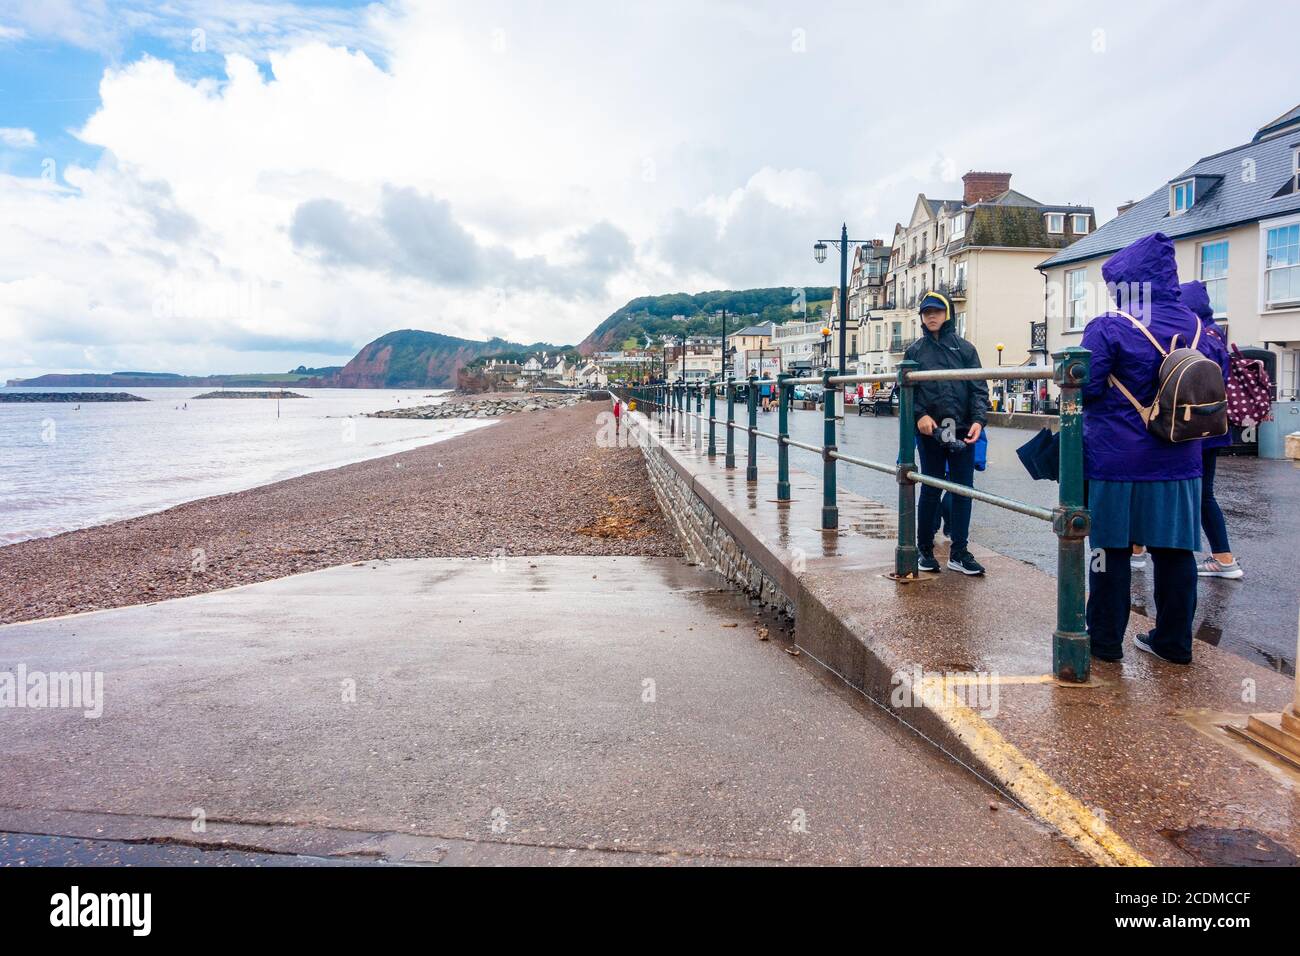 A view along Sidmouth beach in South Devon, UK on a cloudy and wet day at the end of the British summer. The beach is empty. Stock Photo